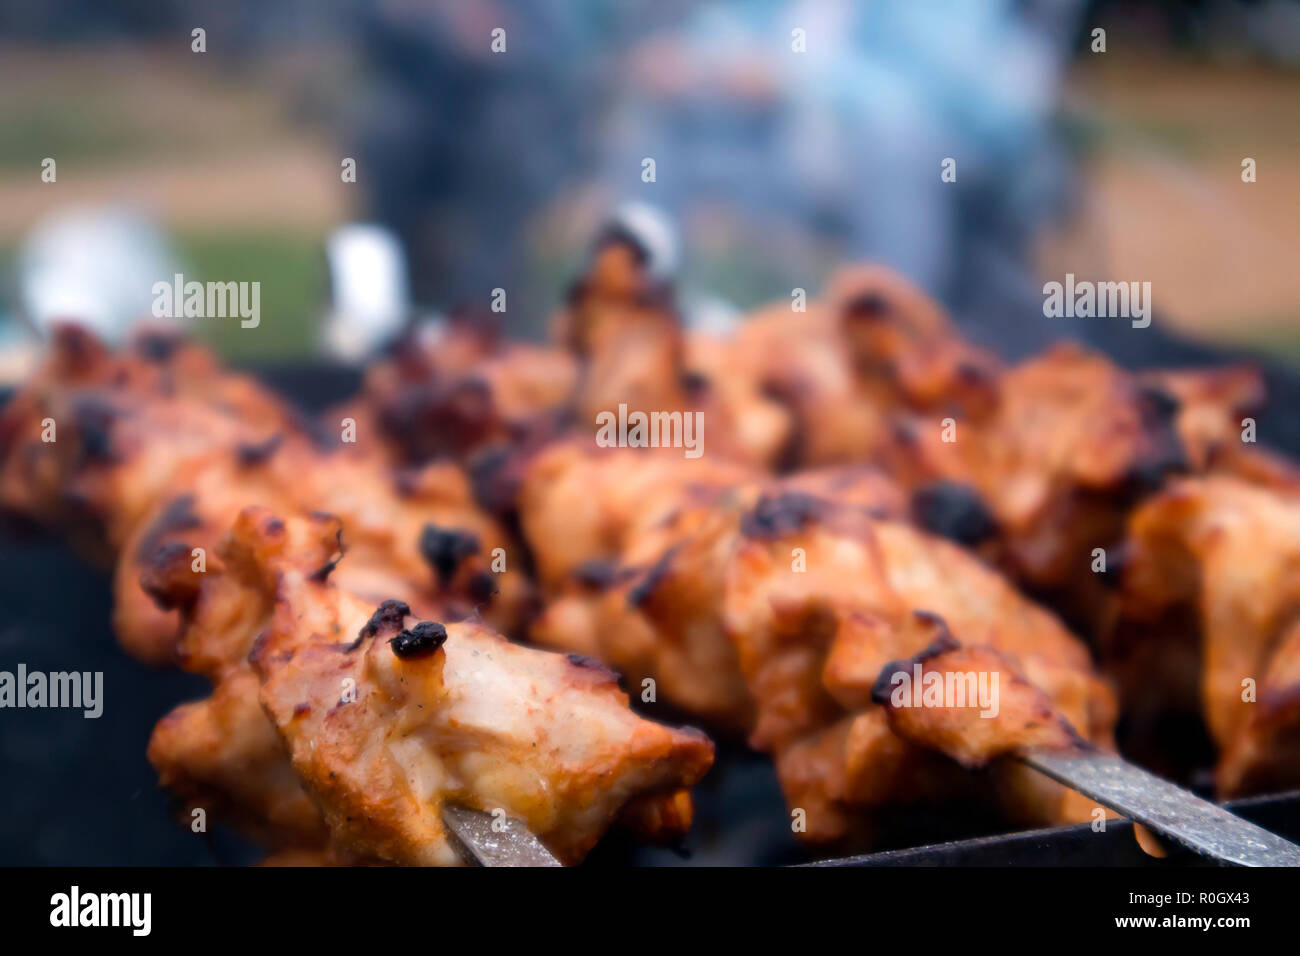 Skewers with roasted chiken meat on the hot grill closeup with two blurred human silhouettes in the background Stock Photo